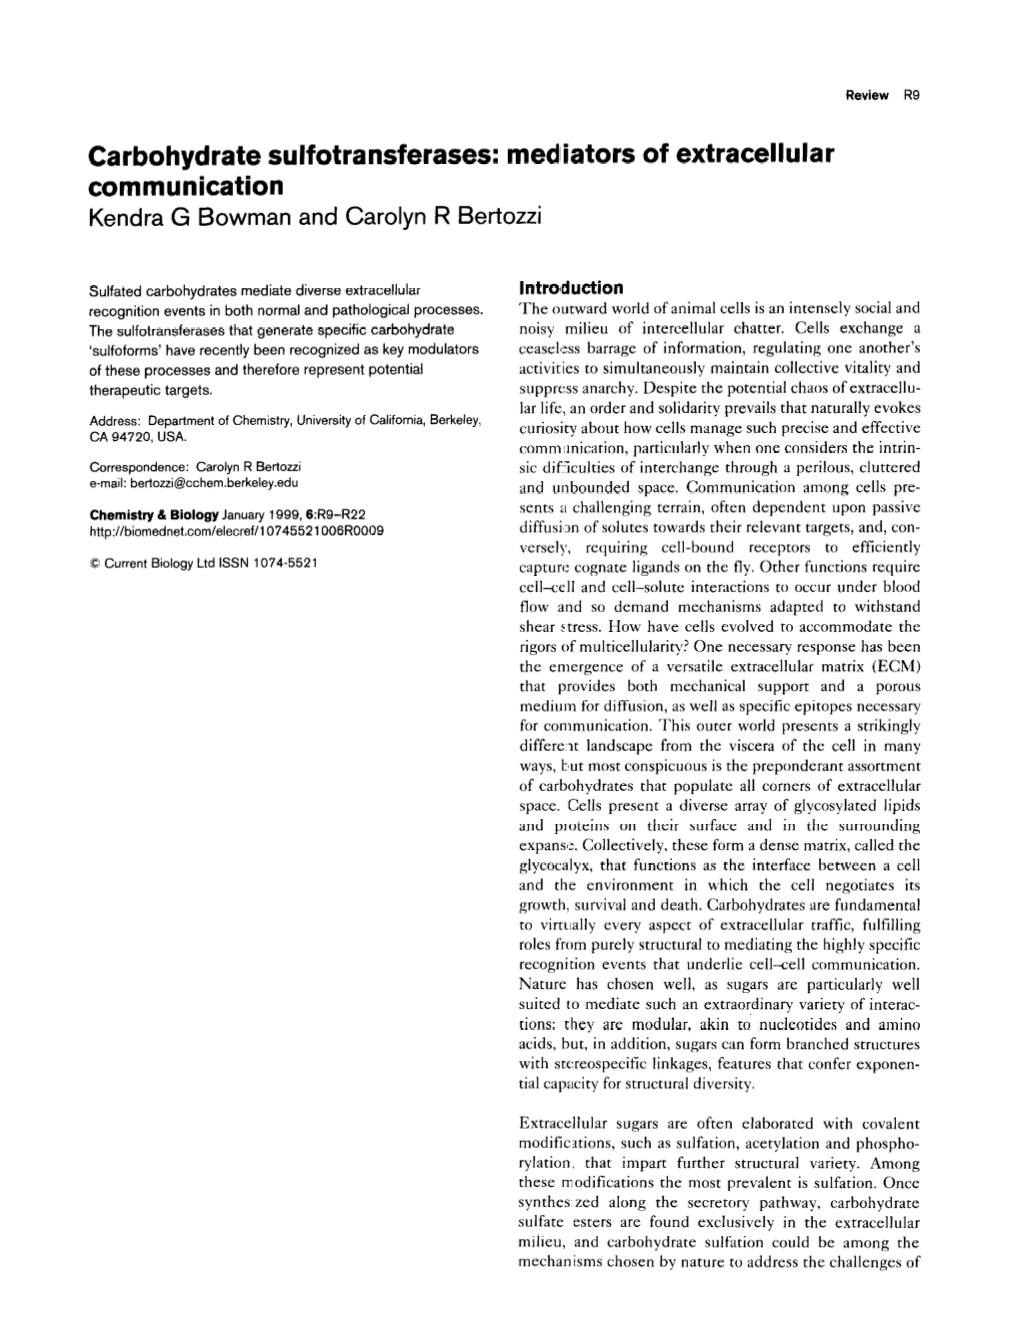 Carbohydrate Sulfotransferases: Medliators of Extracellular Communication Kendra G Bowman and Carolyn R Bertozzi